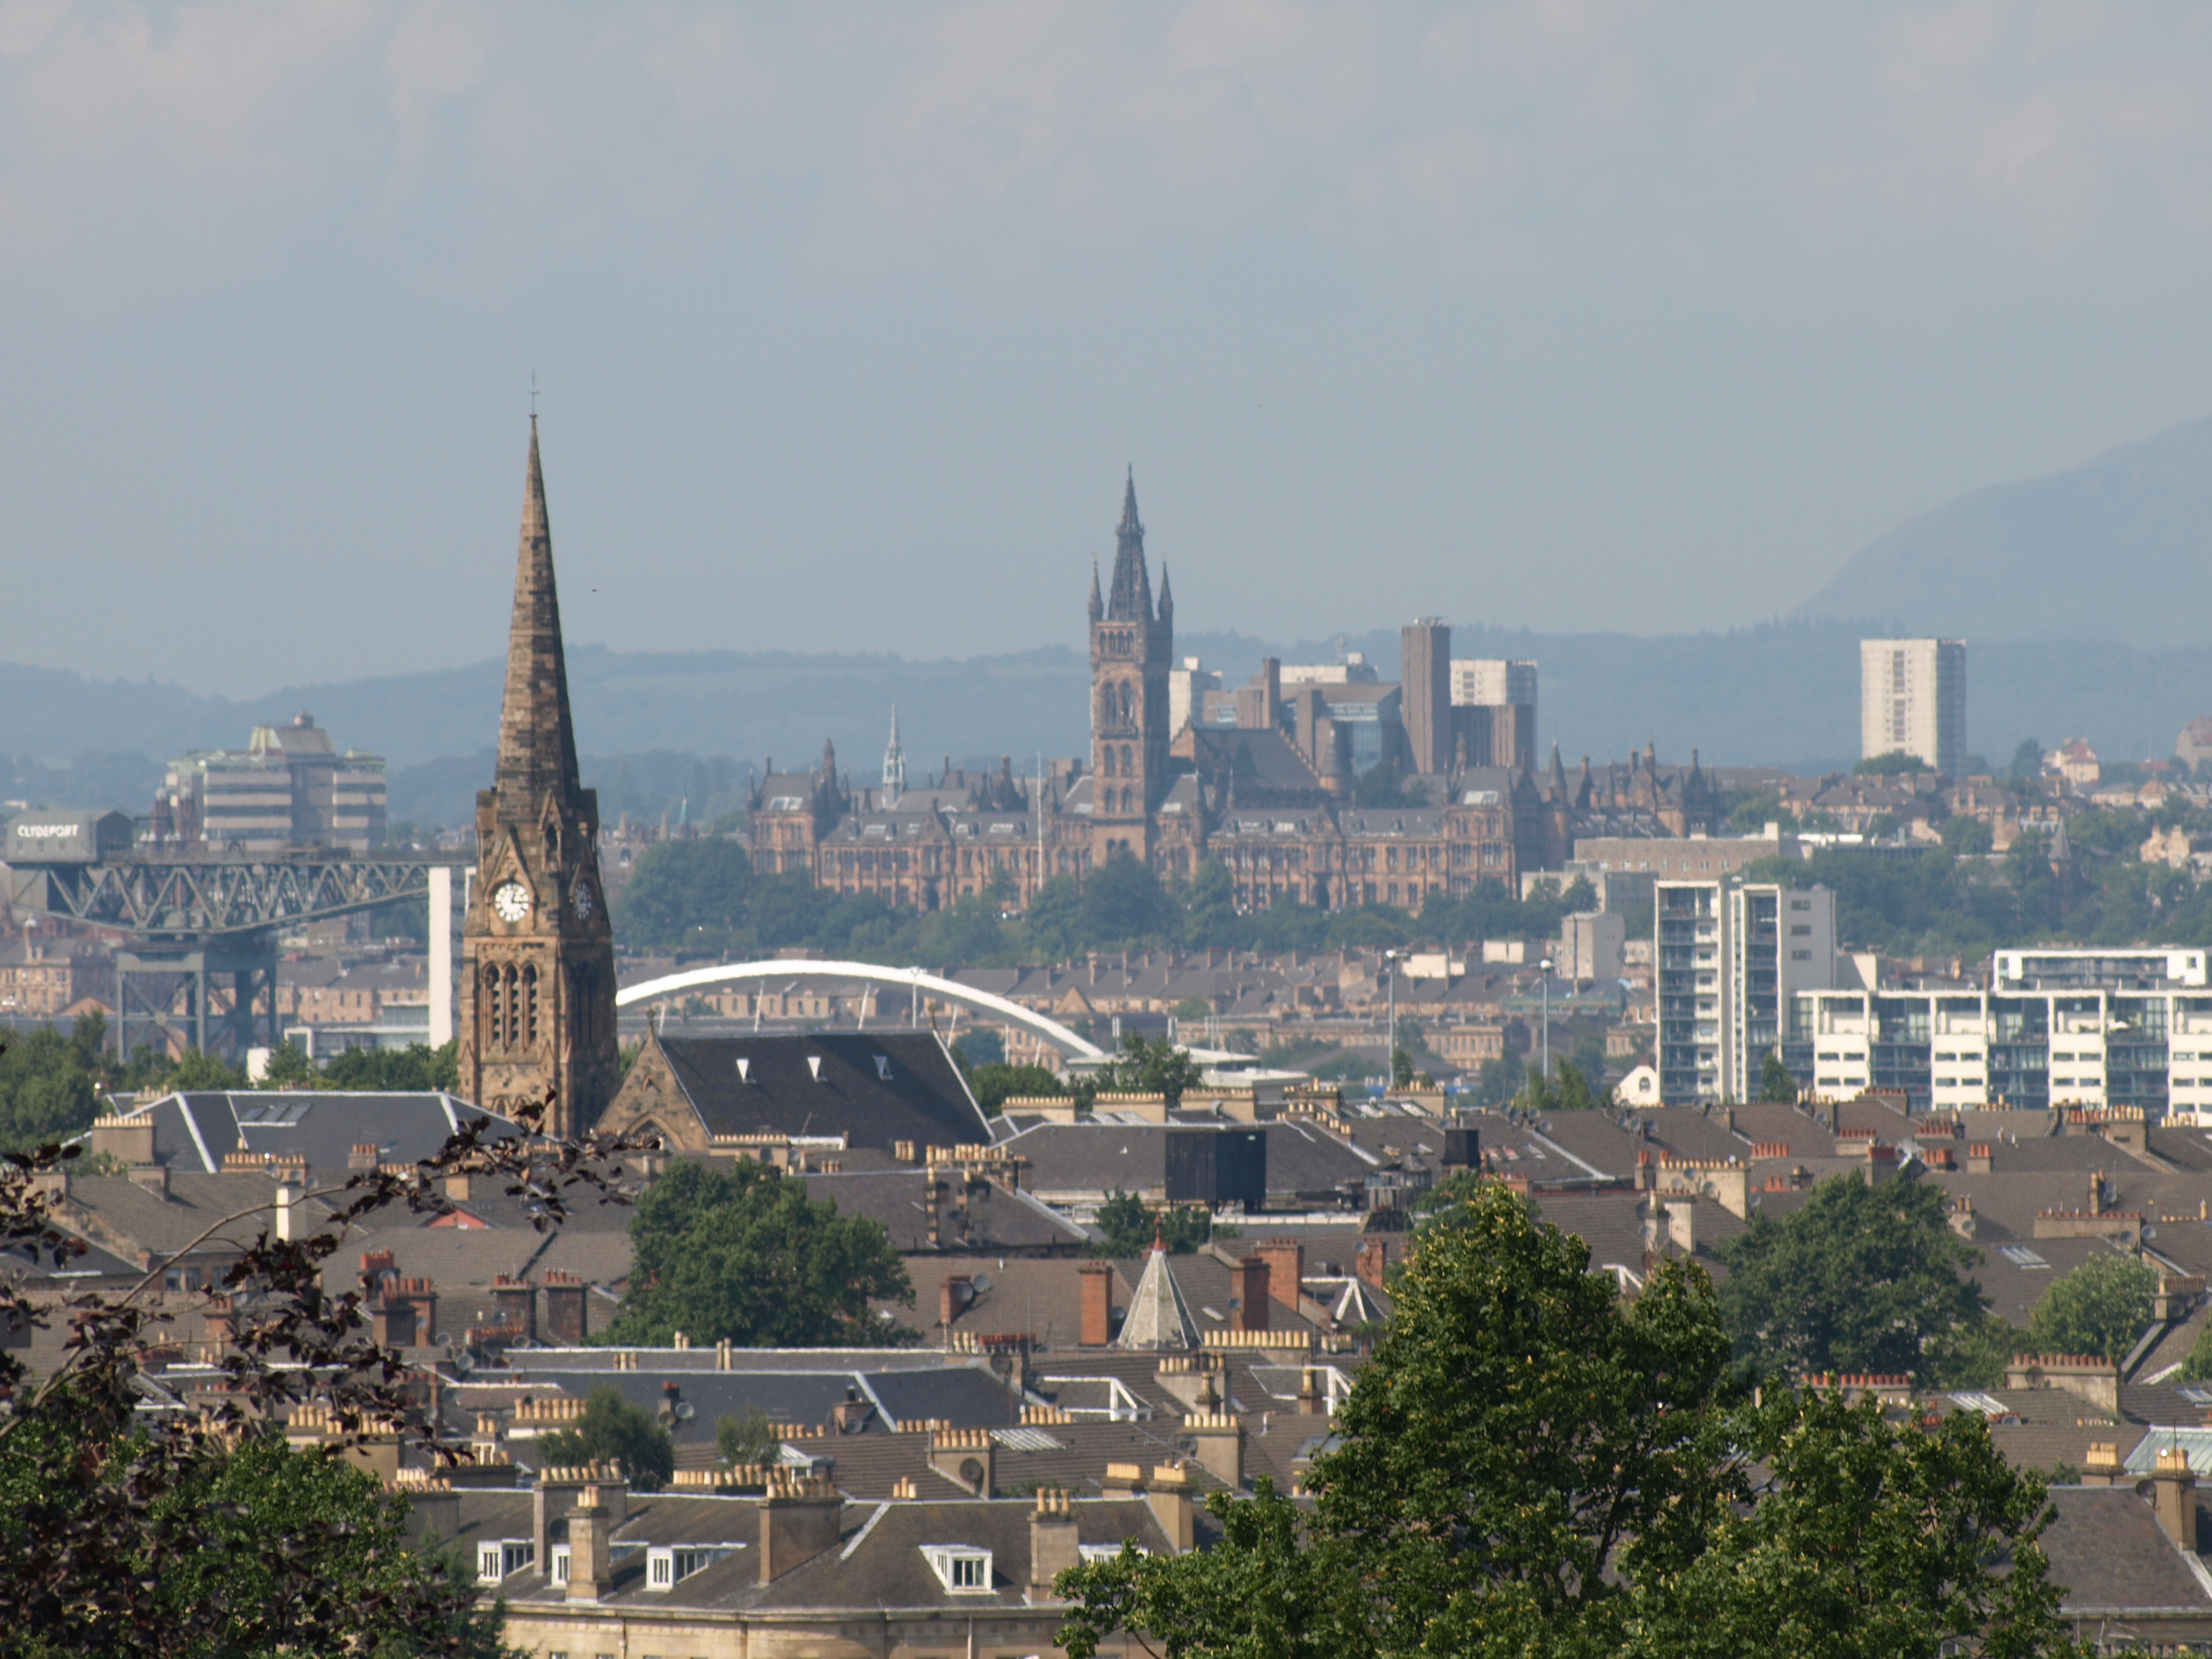 An image overlooking Glasgow from Queens Park Investing in property in Glasgow